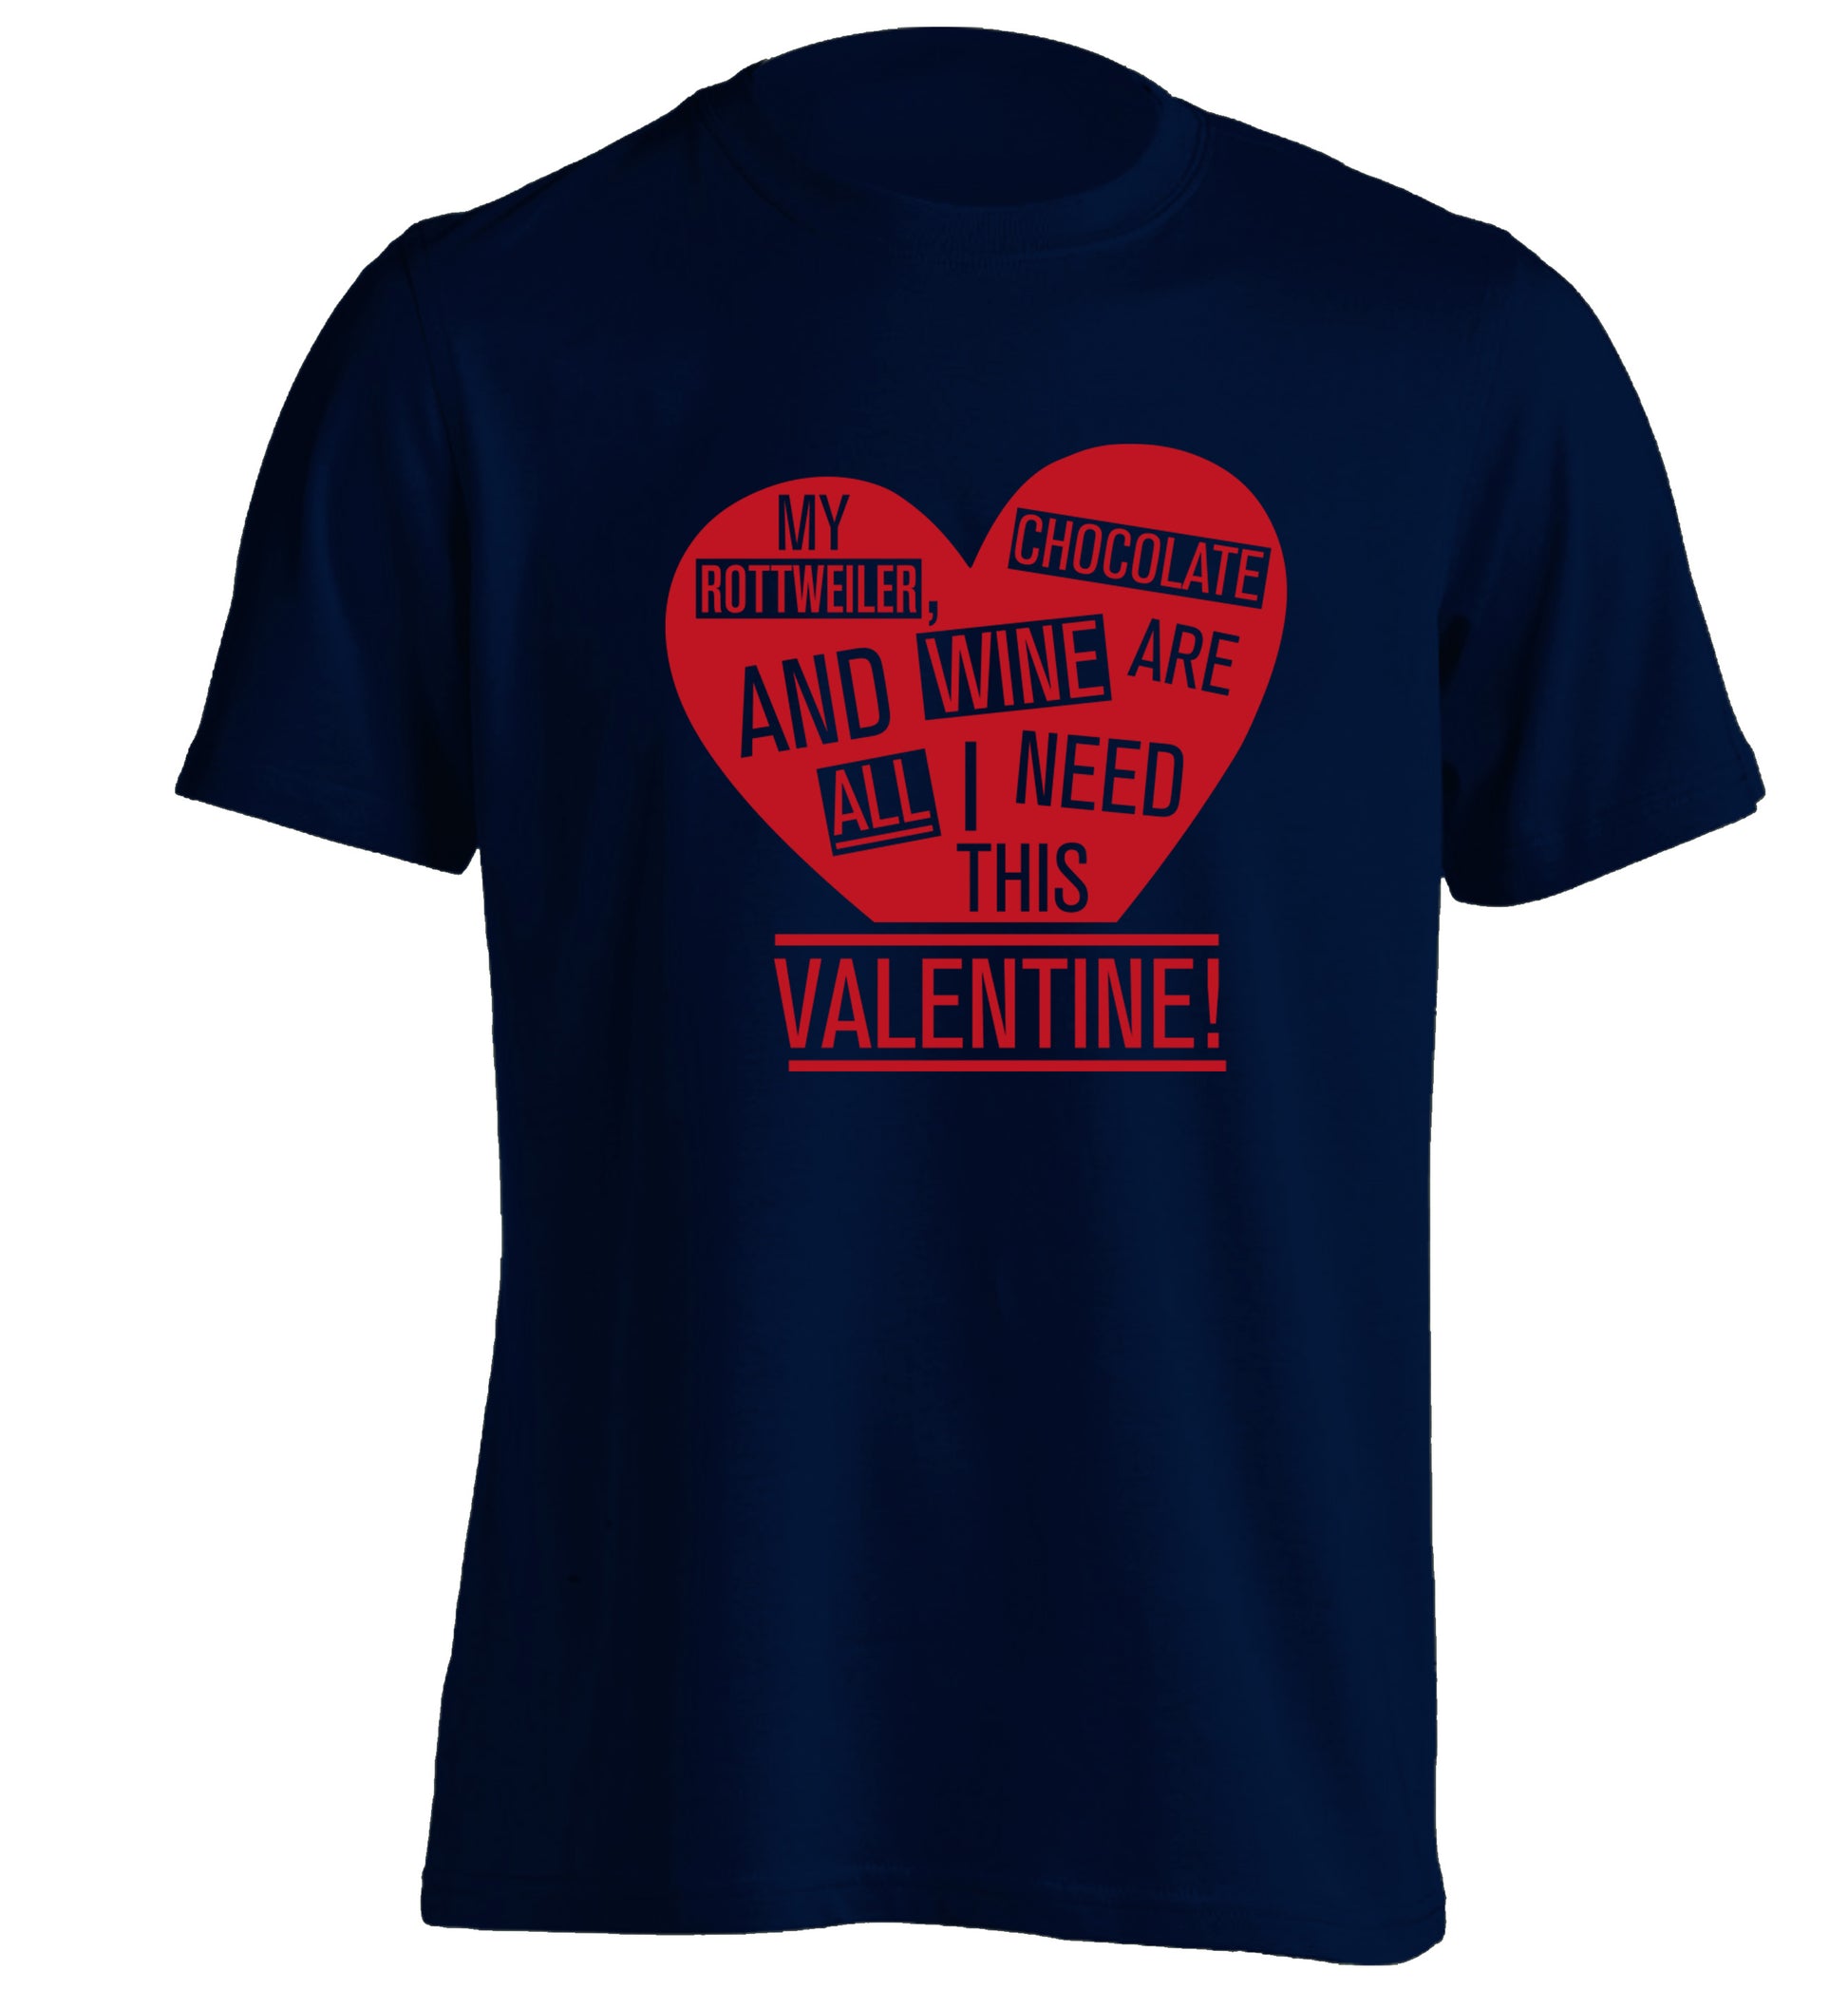 My rottweiler, chocolate and wine are all I need this valentine! adults unisex navy Tshirt 2XL